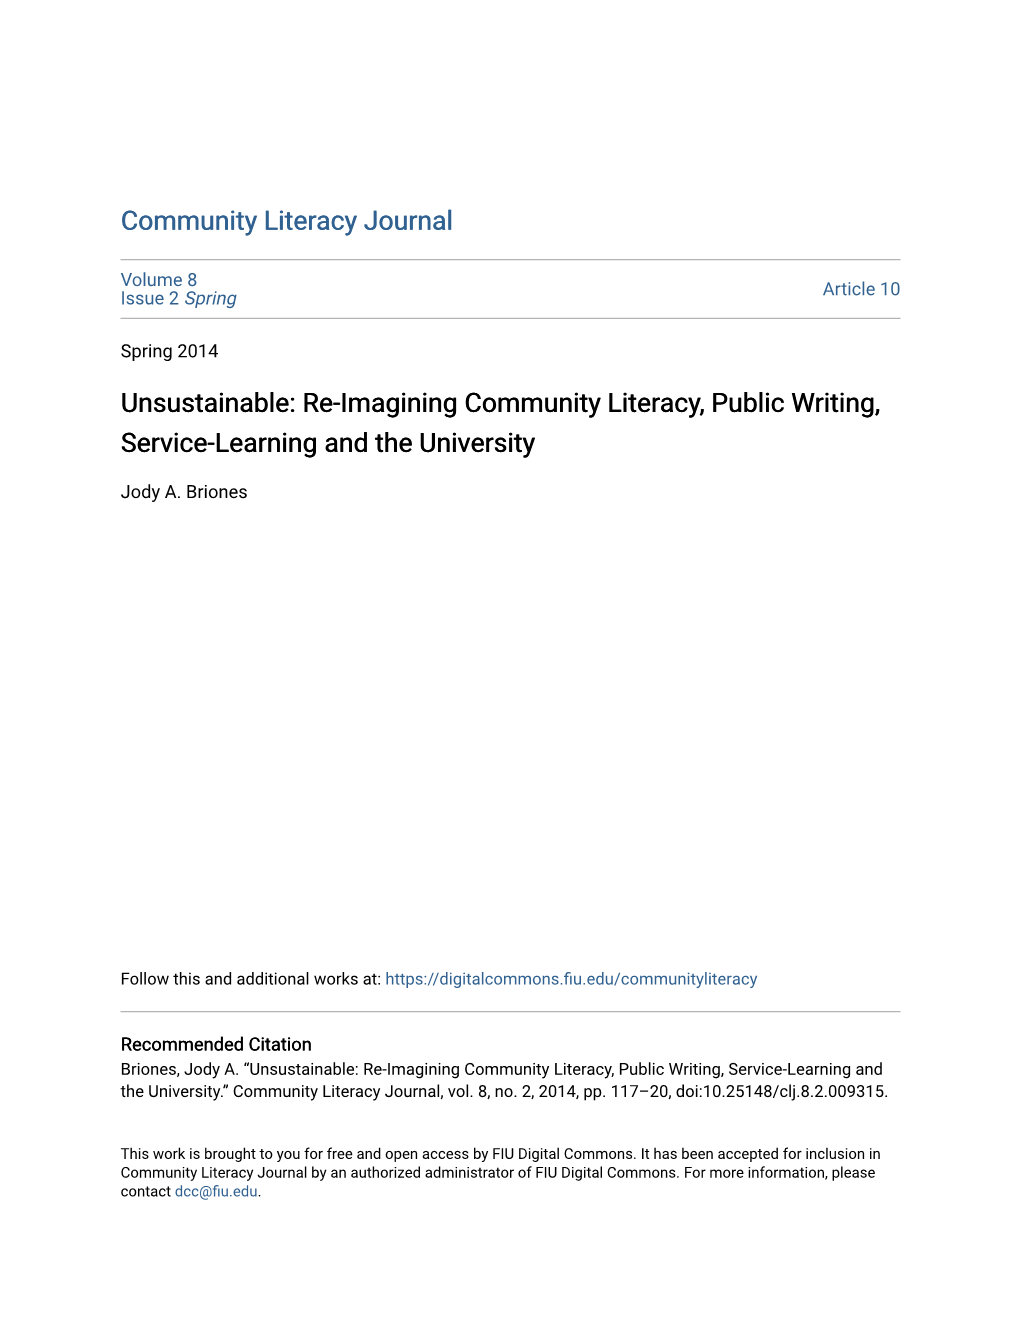 Unsustainable: Re-Imagining Community Literacy, Public Writing, Service-Learning and the University